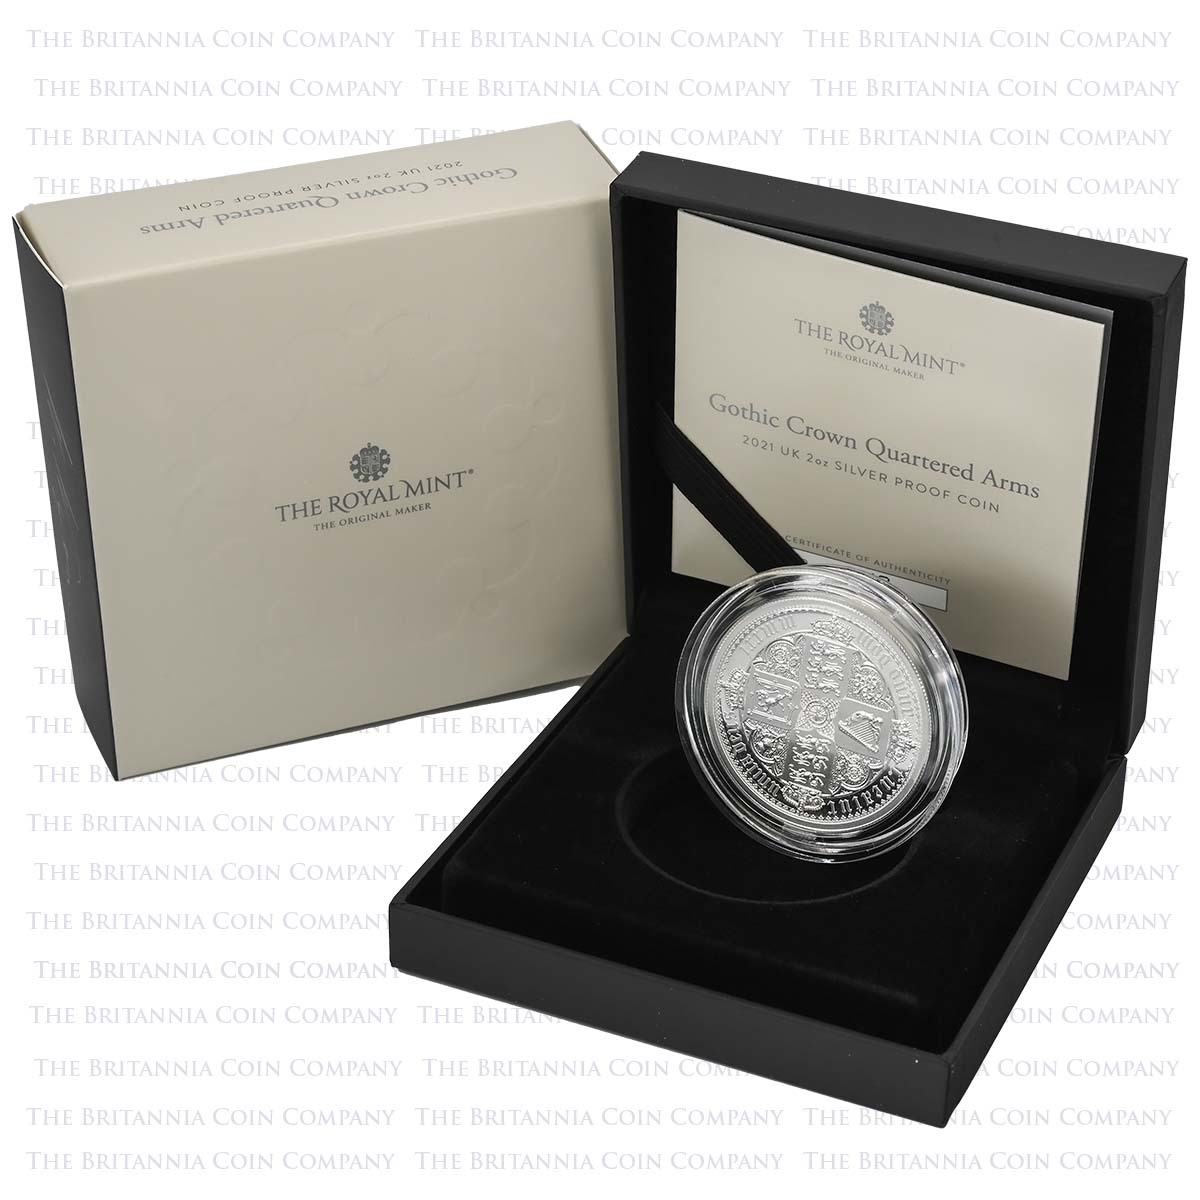 UK21GR2S 2021 Great Engravers Gothic Crown Quartered Arms 2 Ounce Silver Proof Boxed